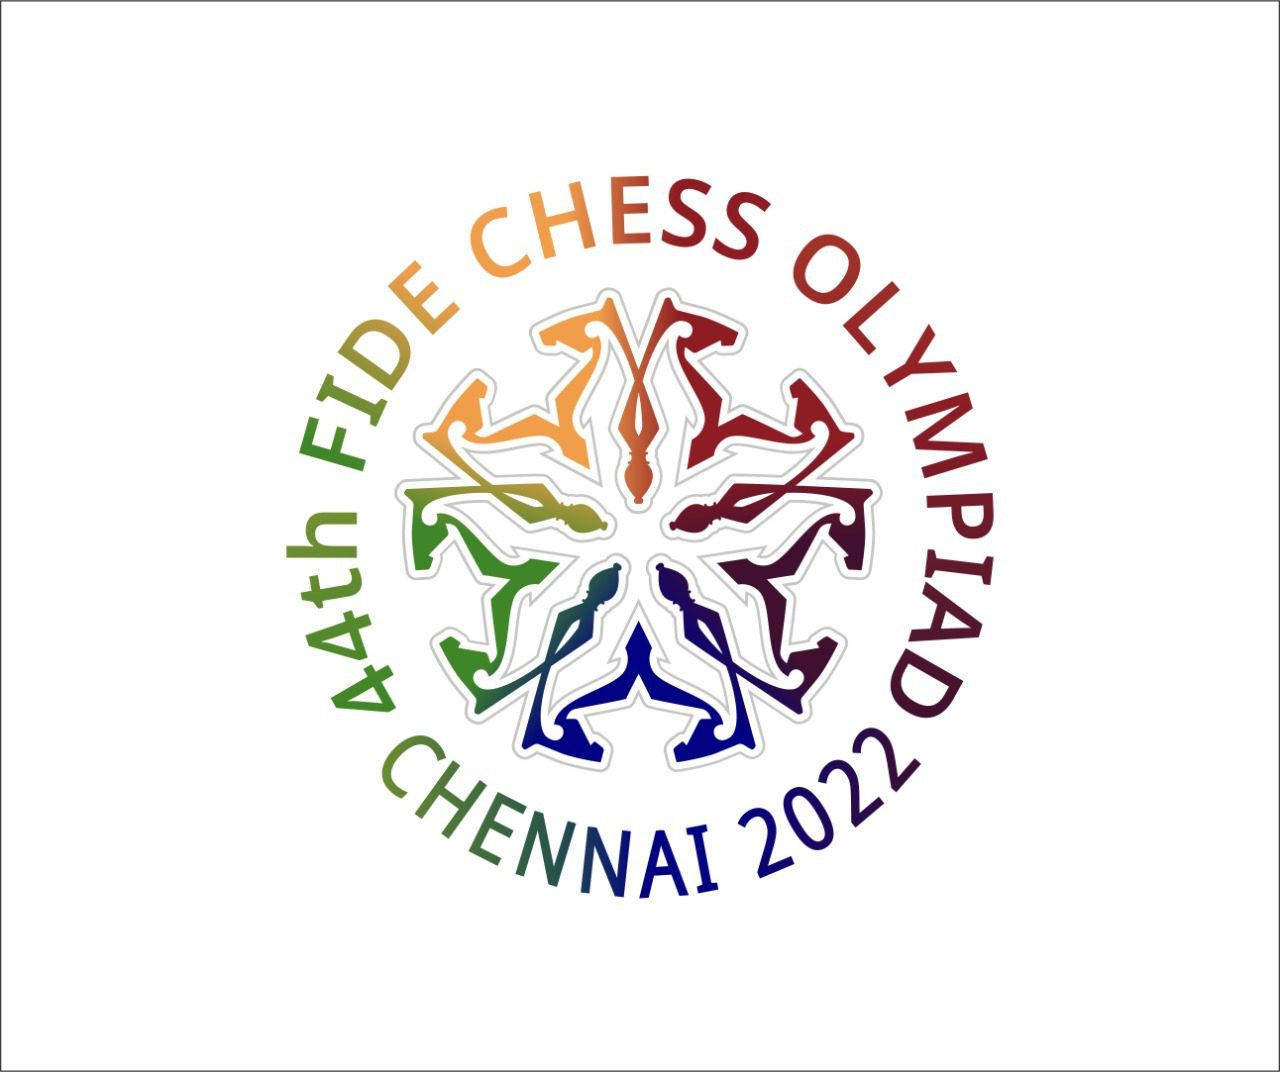 Thank you for bringing the Chess Olympiad 2022 to India's chess